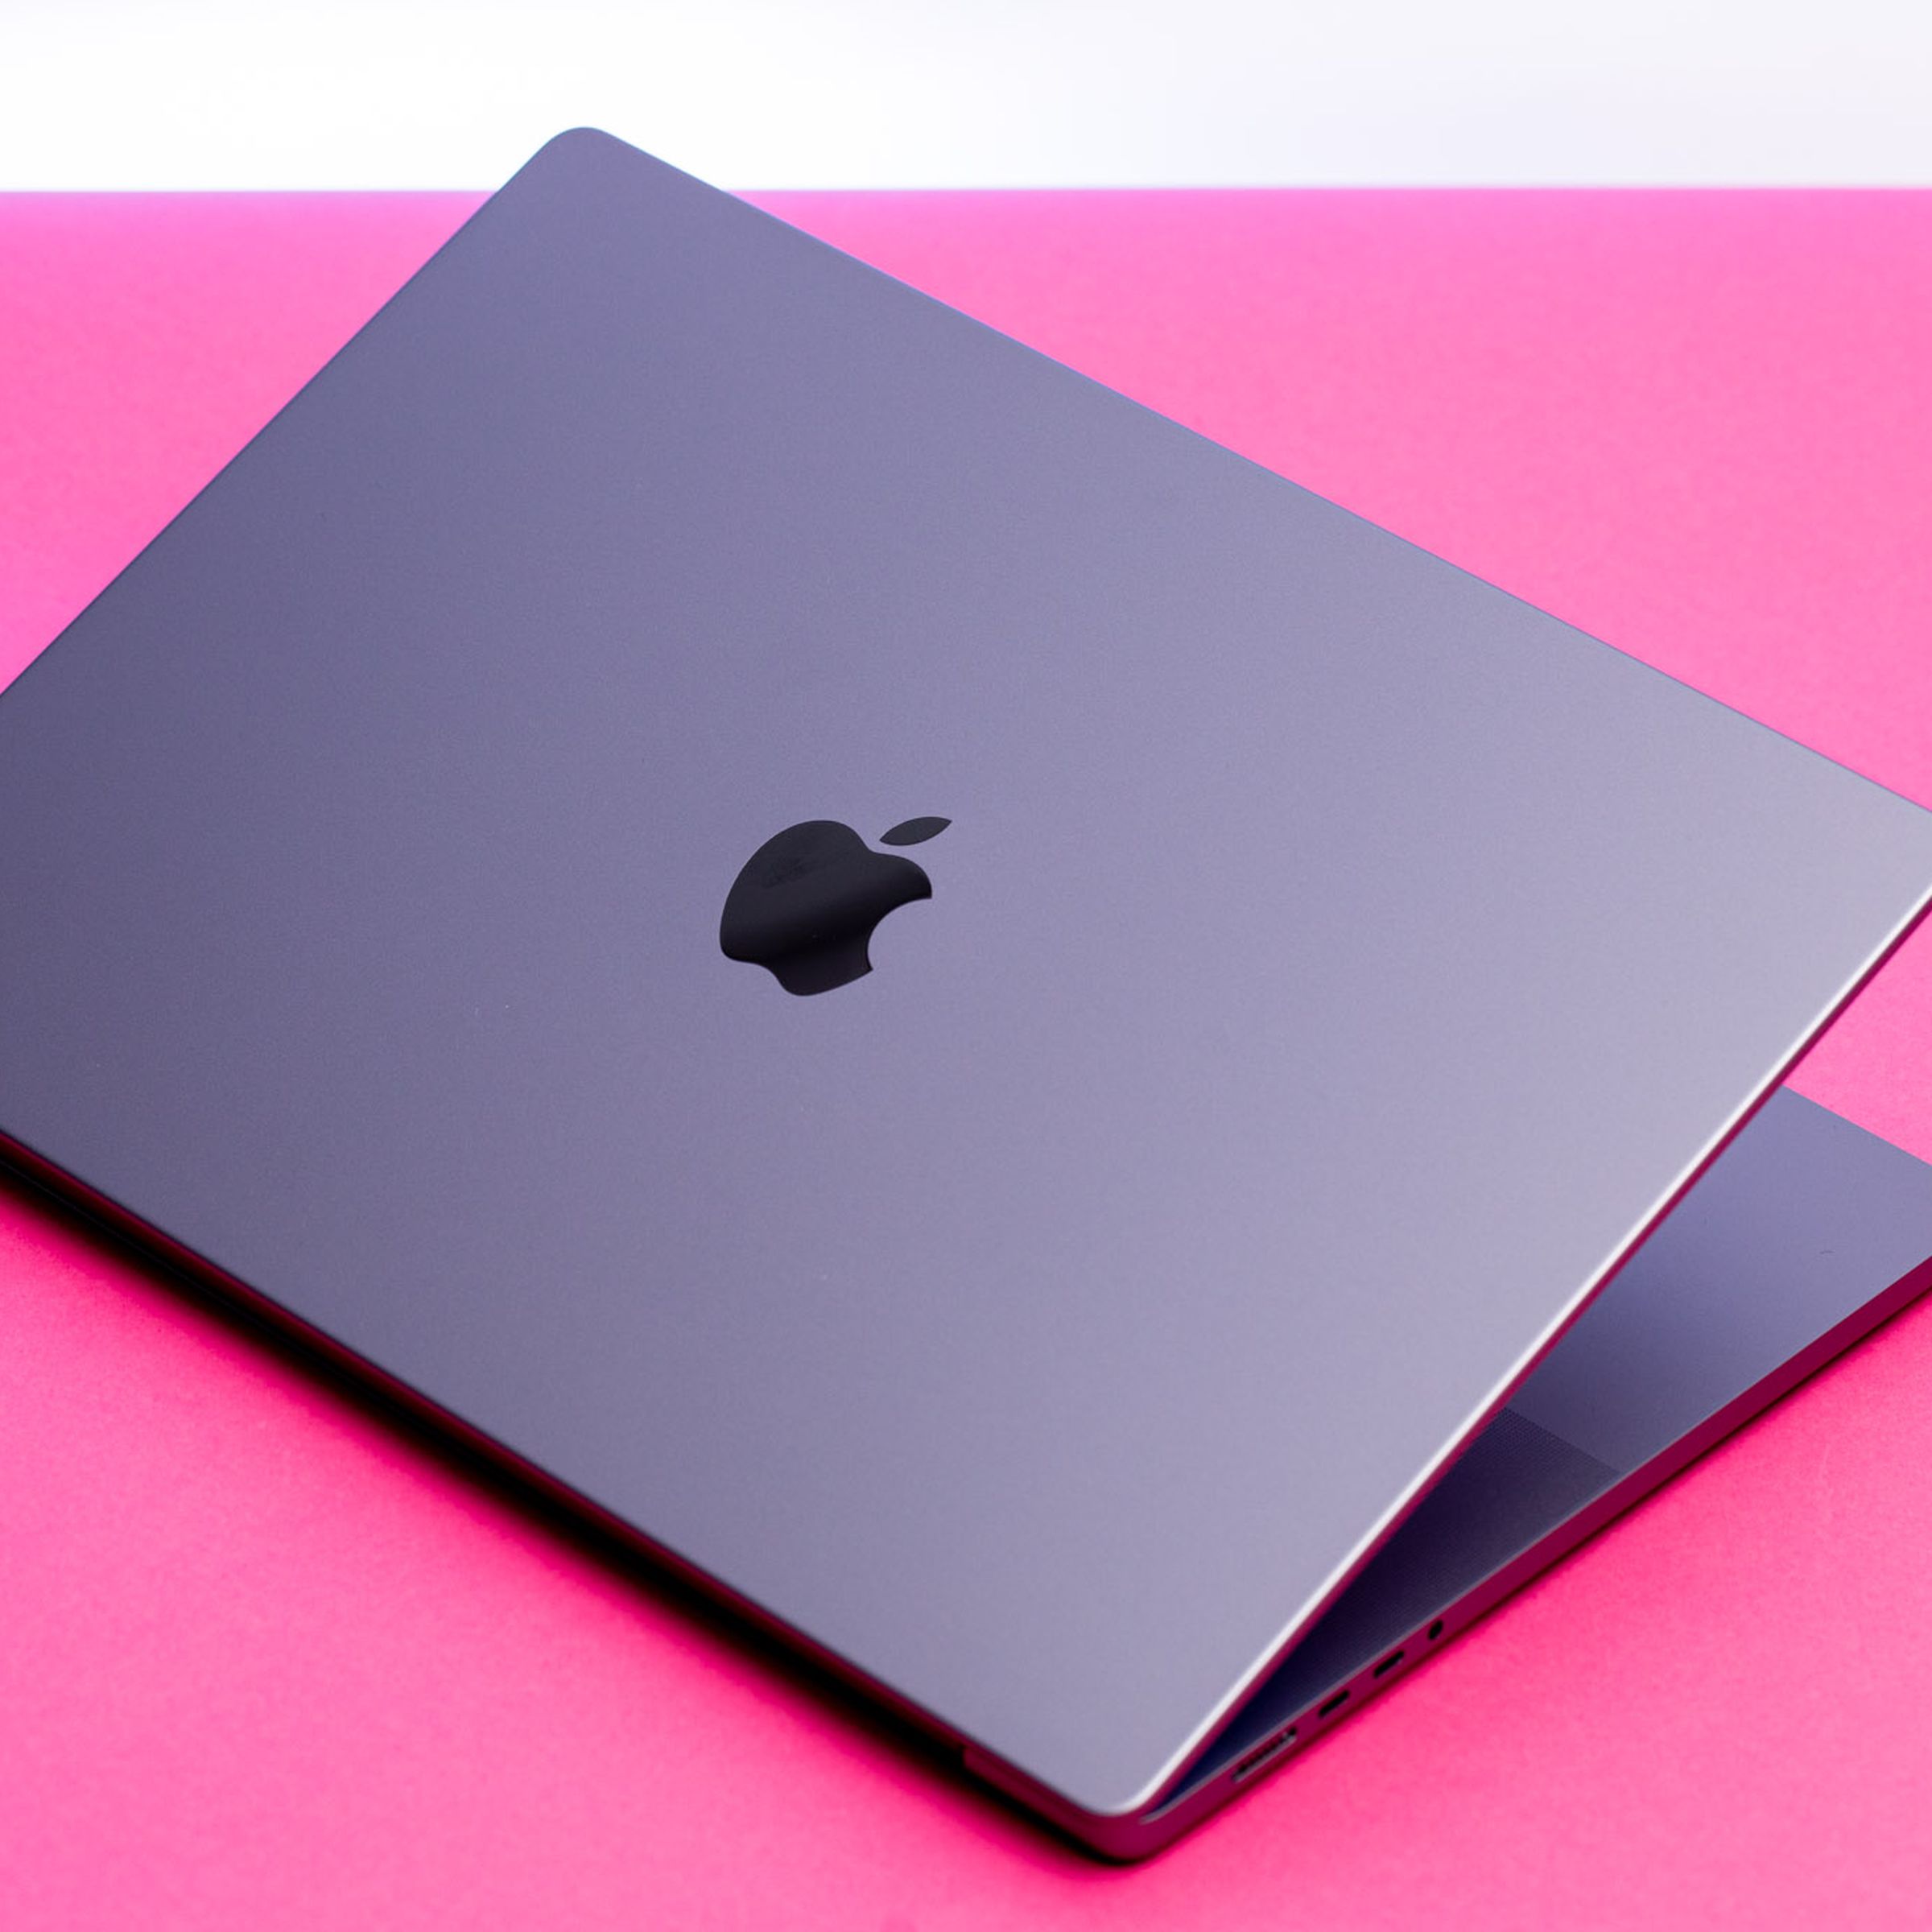 The MacBook Pro 16 half open seen from above on a pink table.